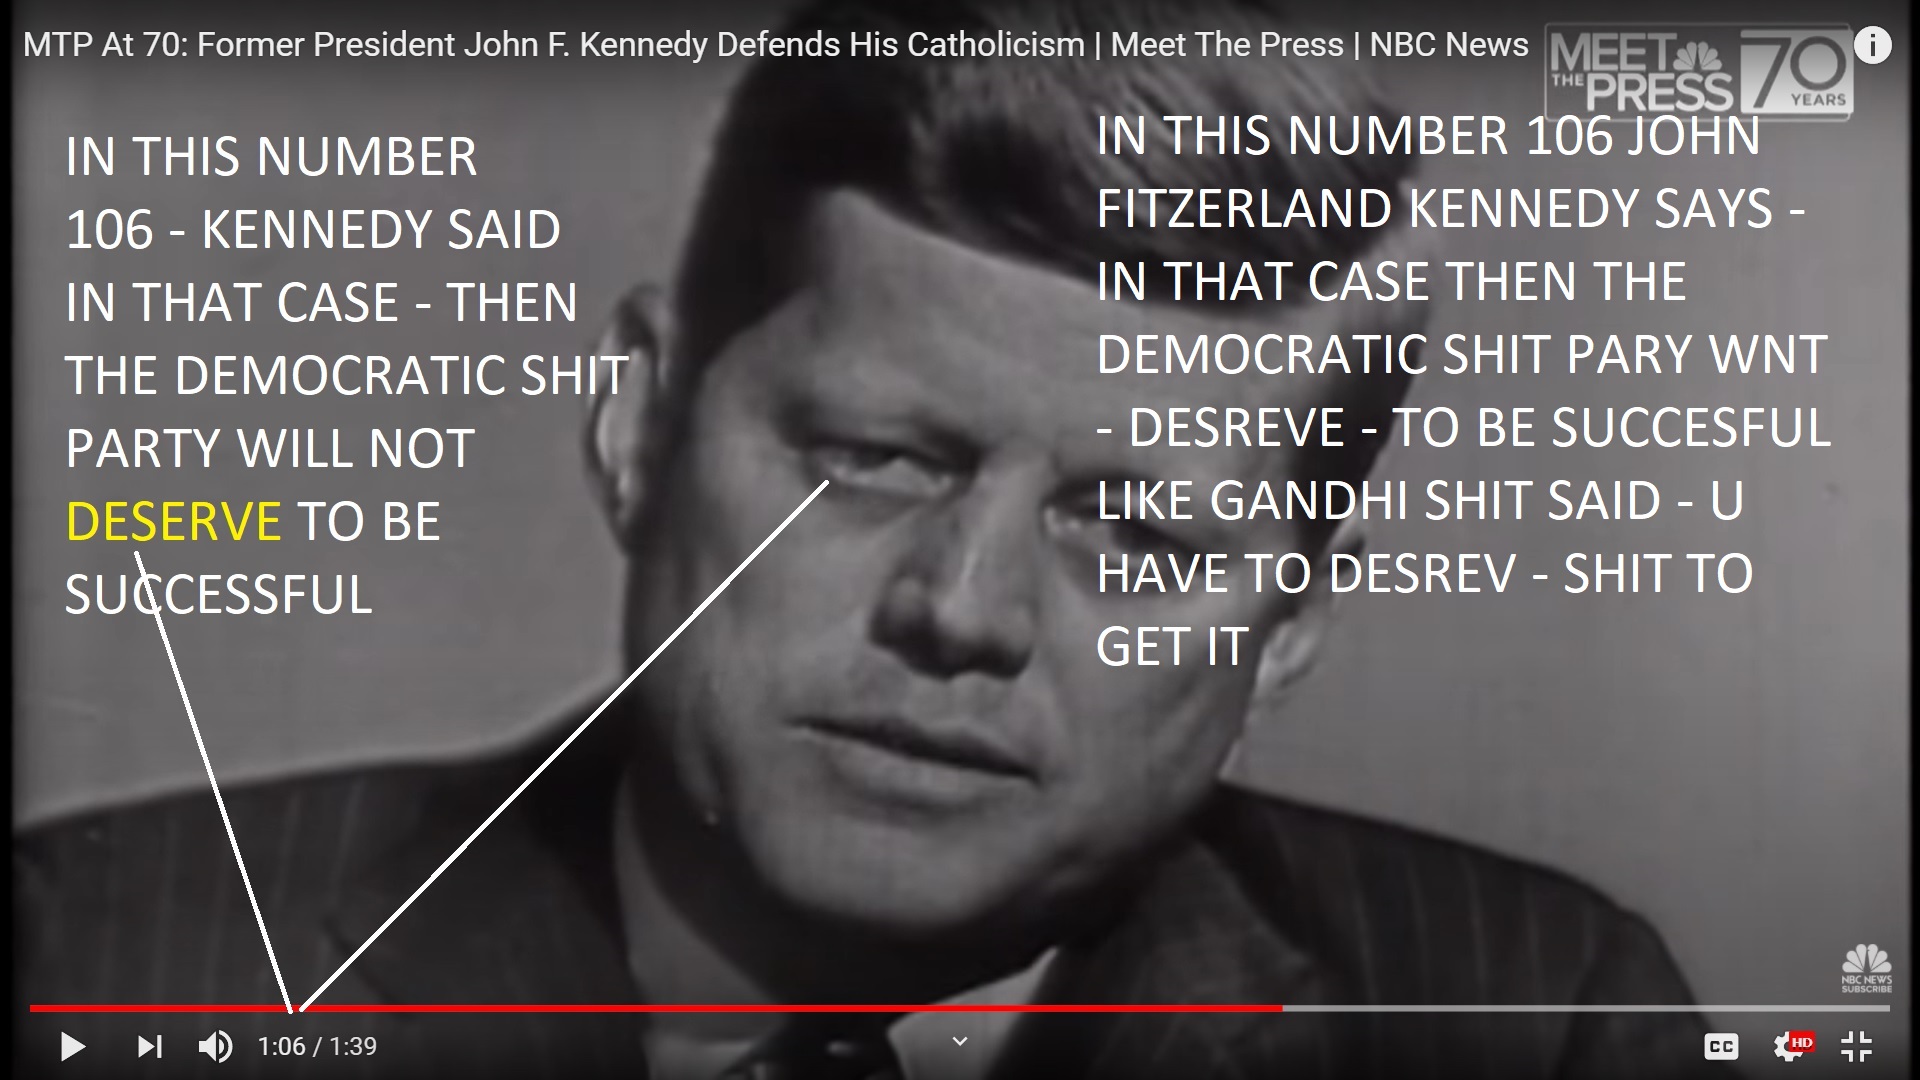 IN THIS NUMBER 106 JOHN FITZERLAND KENNEDY SAYS - IN THAT CASE THEN THE DEMOCRATIC SHIT PARY WNT - DESREVE - TO BE SUCCESFUL LIKE GANDHI SHIT SAID - U HAVE TO DESREV - SHIT TO GET IT